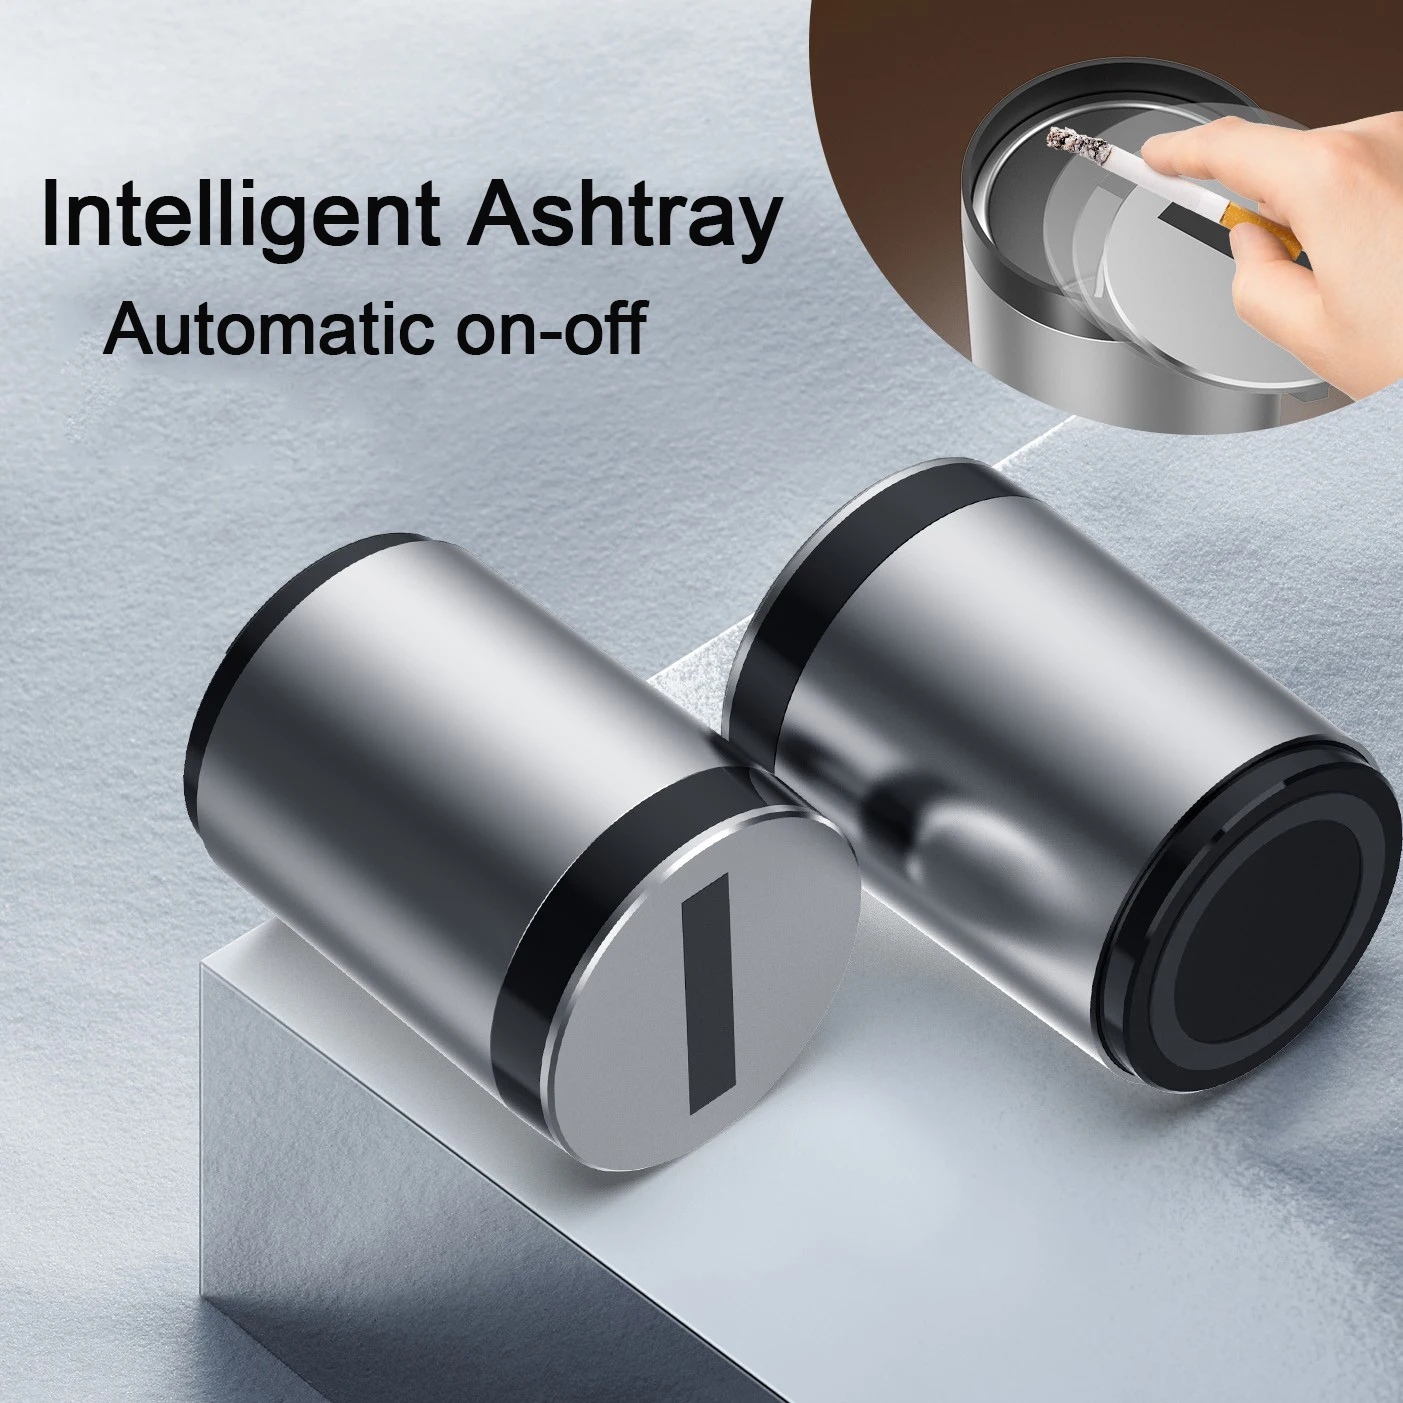 Intelligent aluminum  ashtray for car  that opens and closes automatically